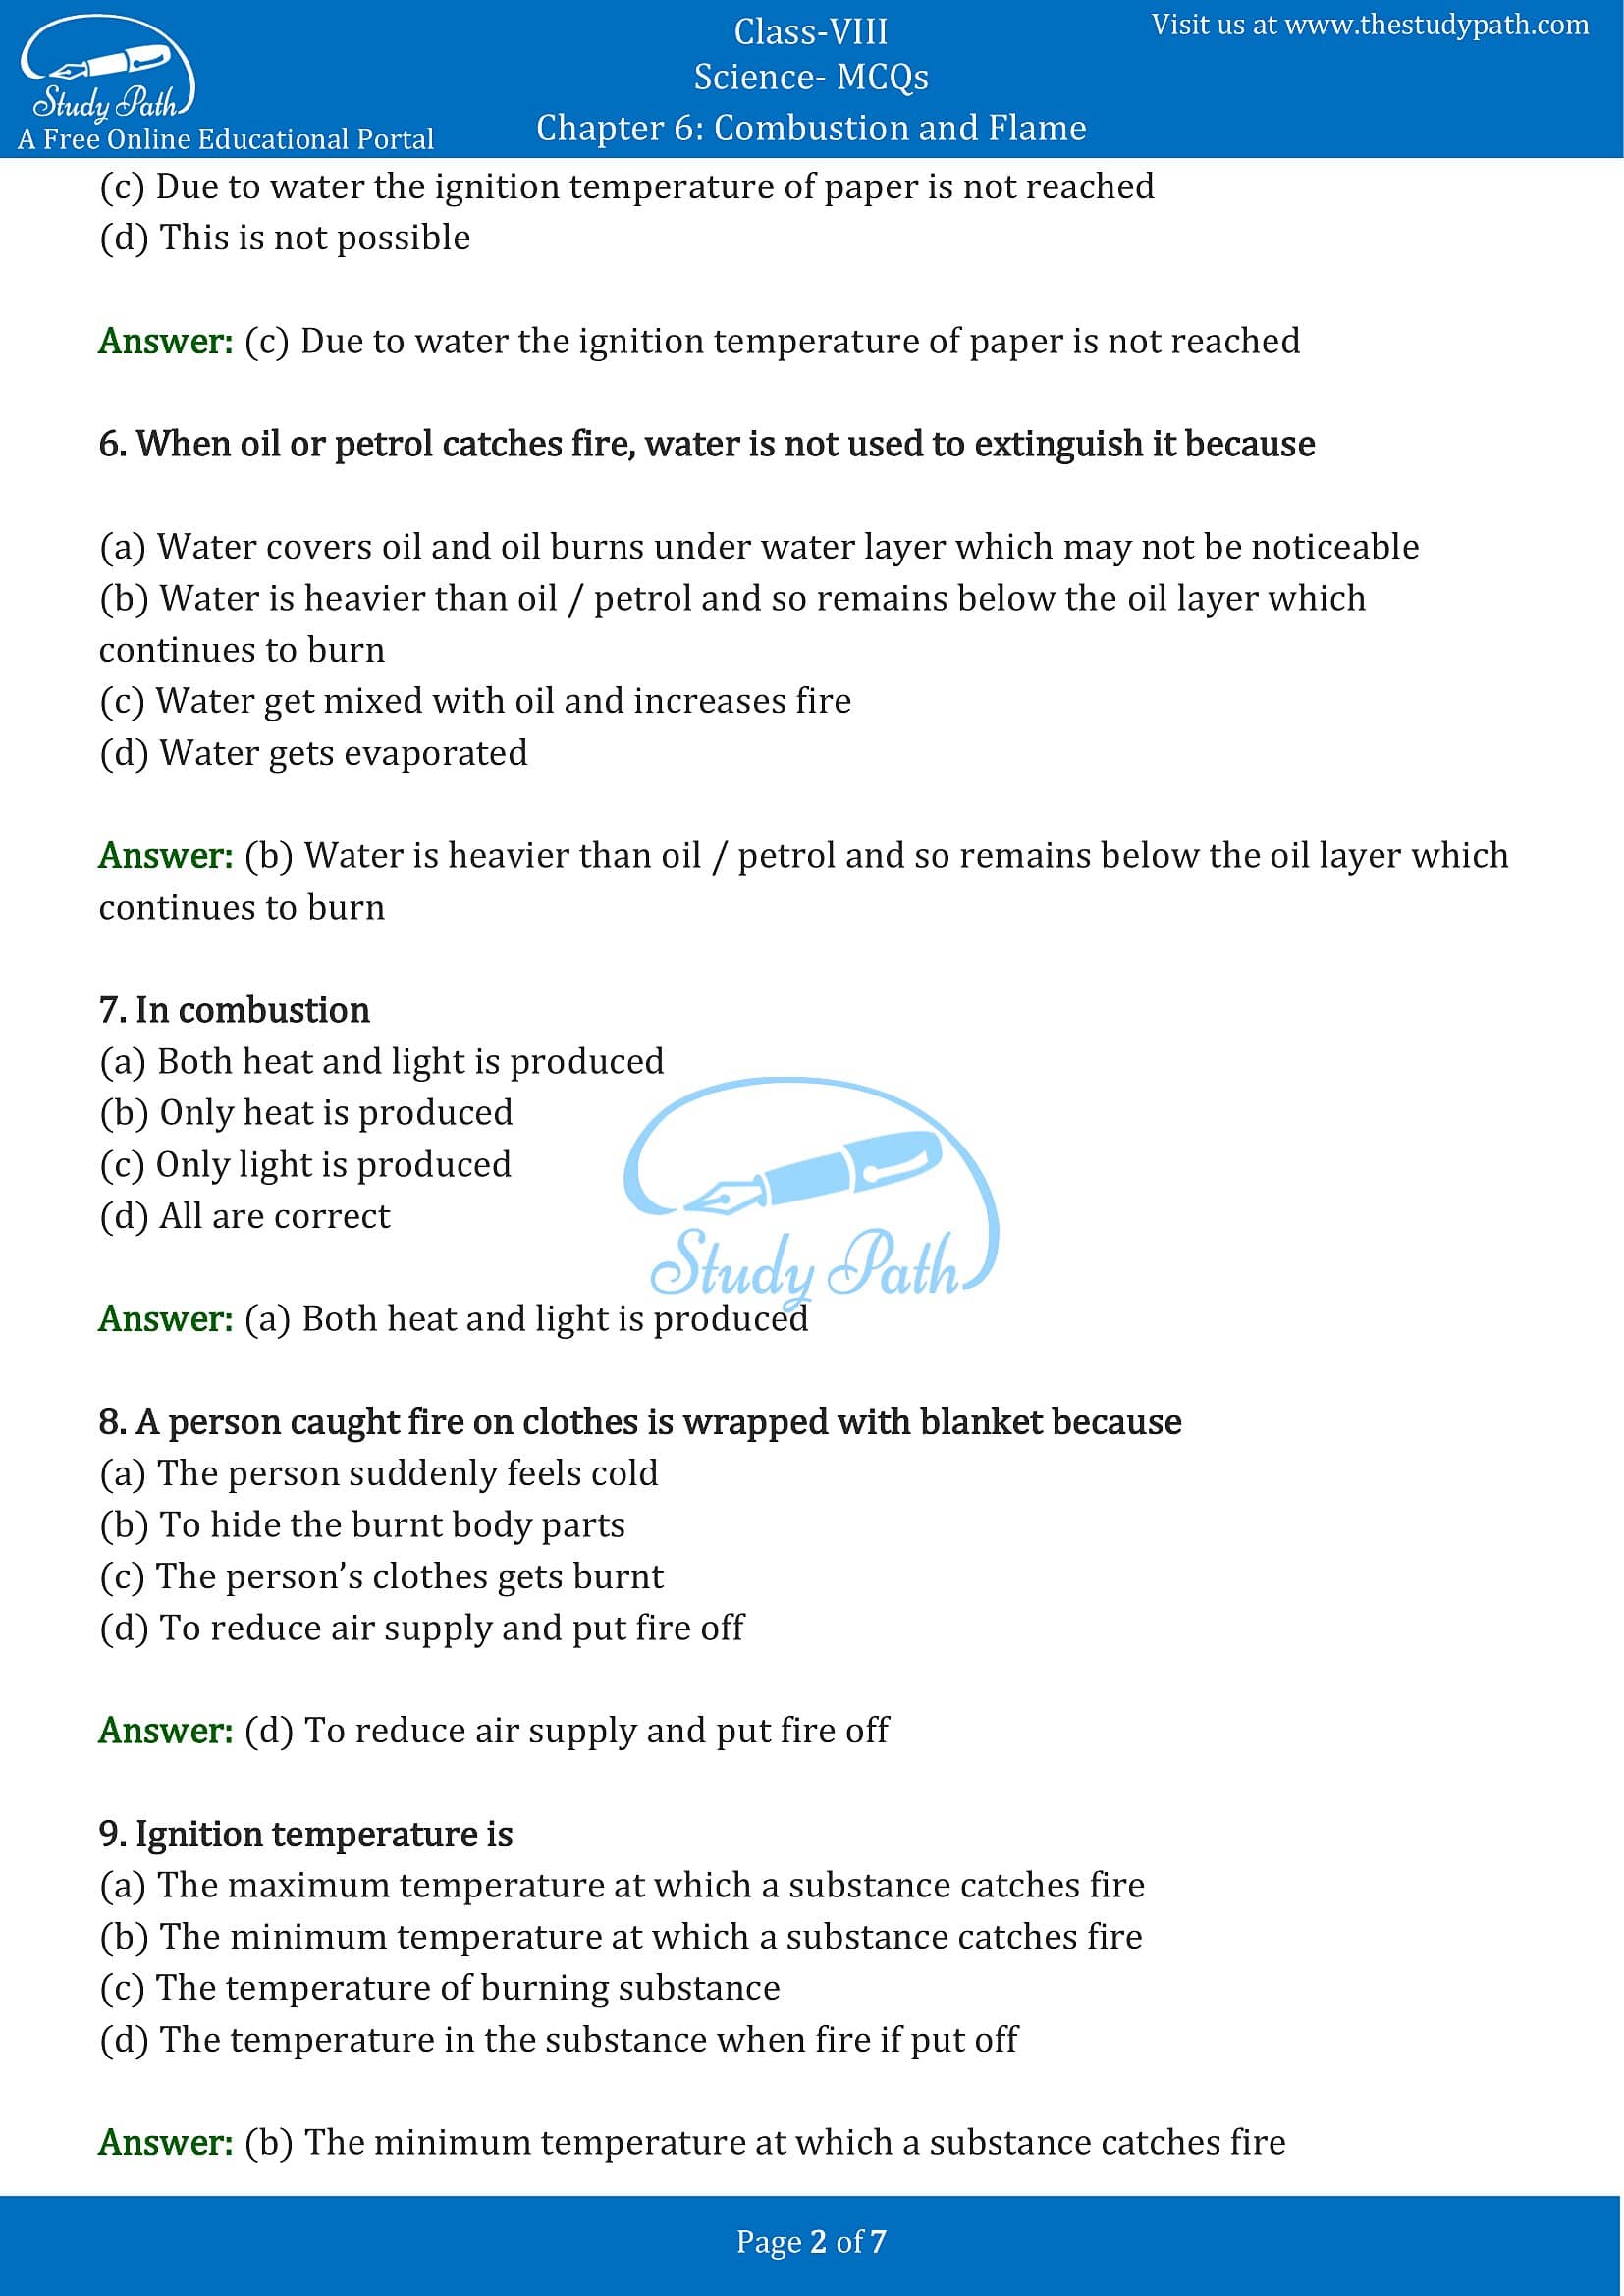 MCQ Questions for Class 8 Science Chapter 6 Combustion and Flame with Answers PDF -2